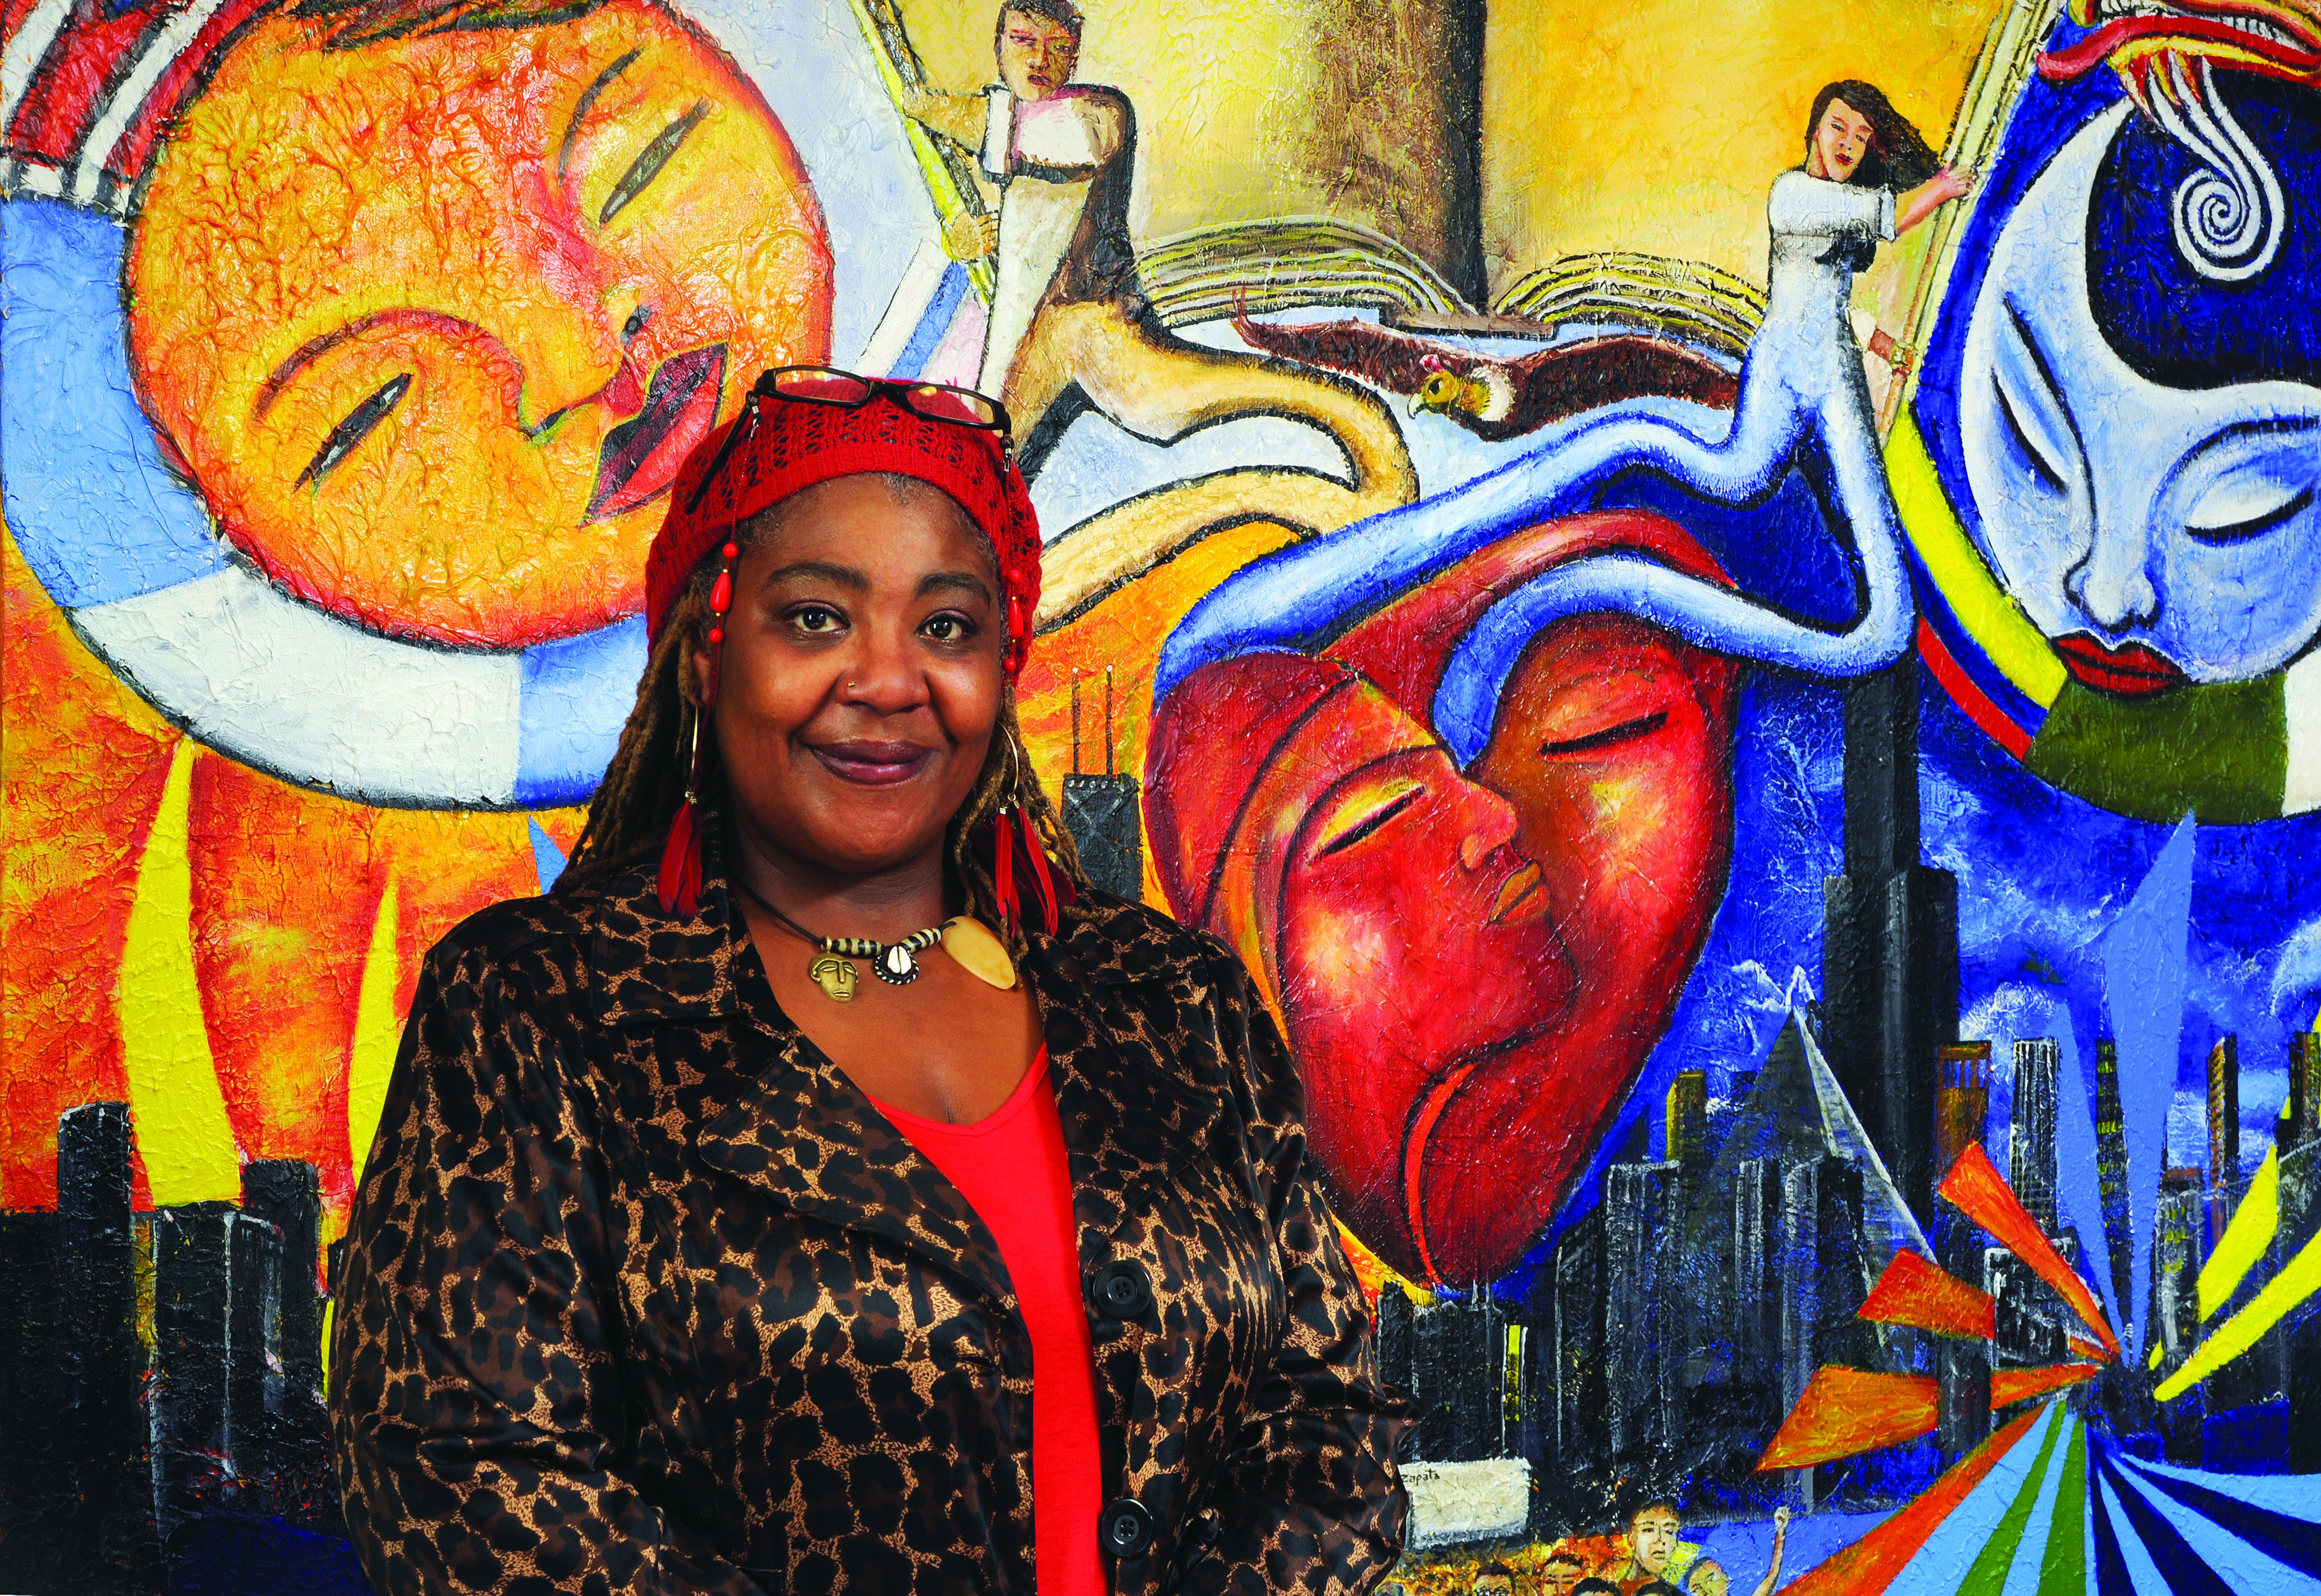 Rachel Hall, NEIUAA Internship Scholarship recipient, poses in front of a colorful mural.